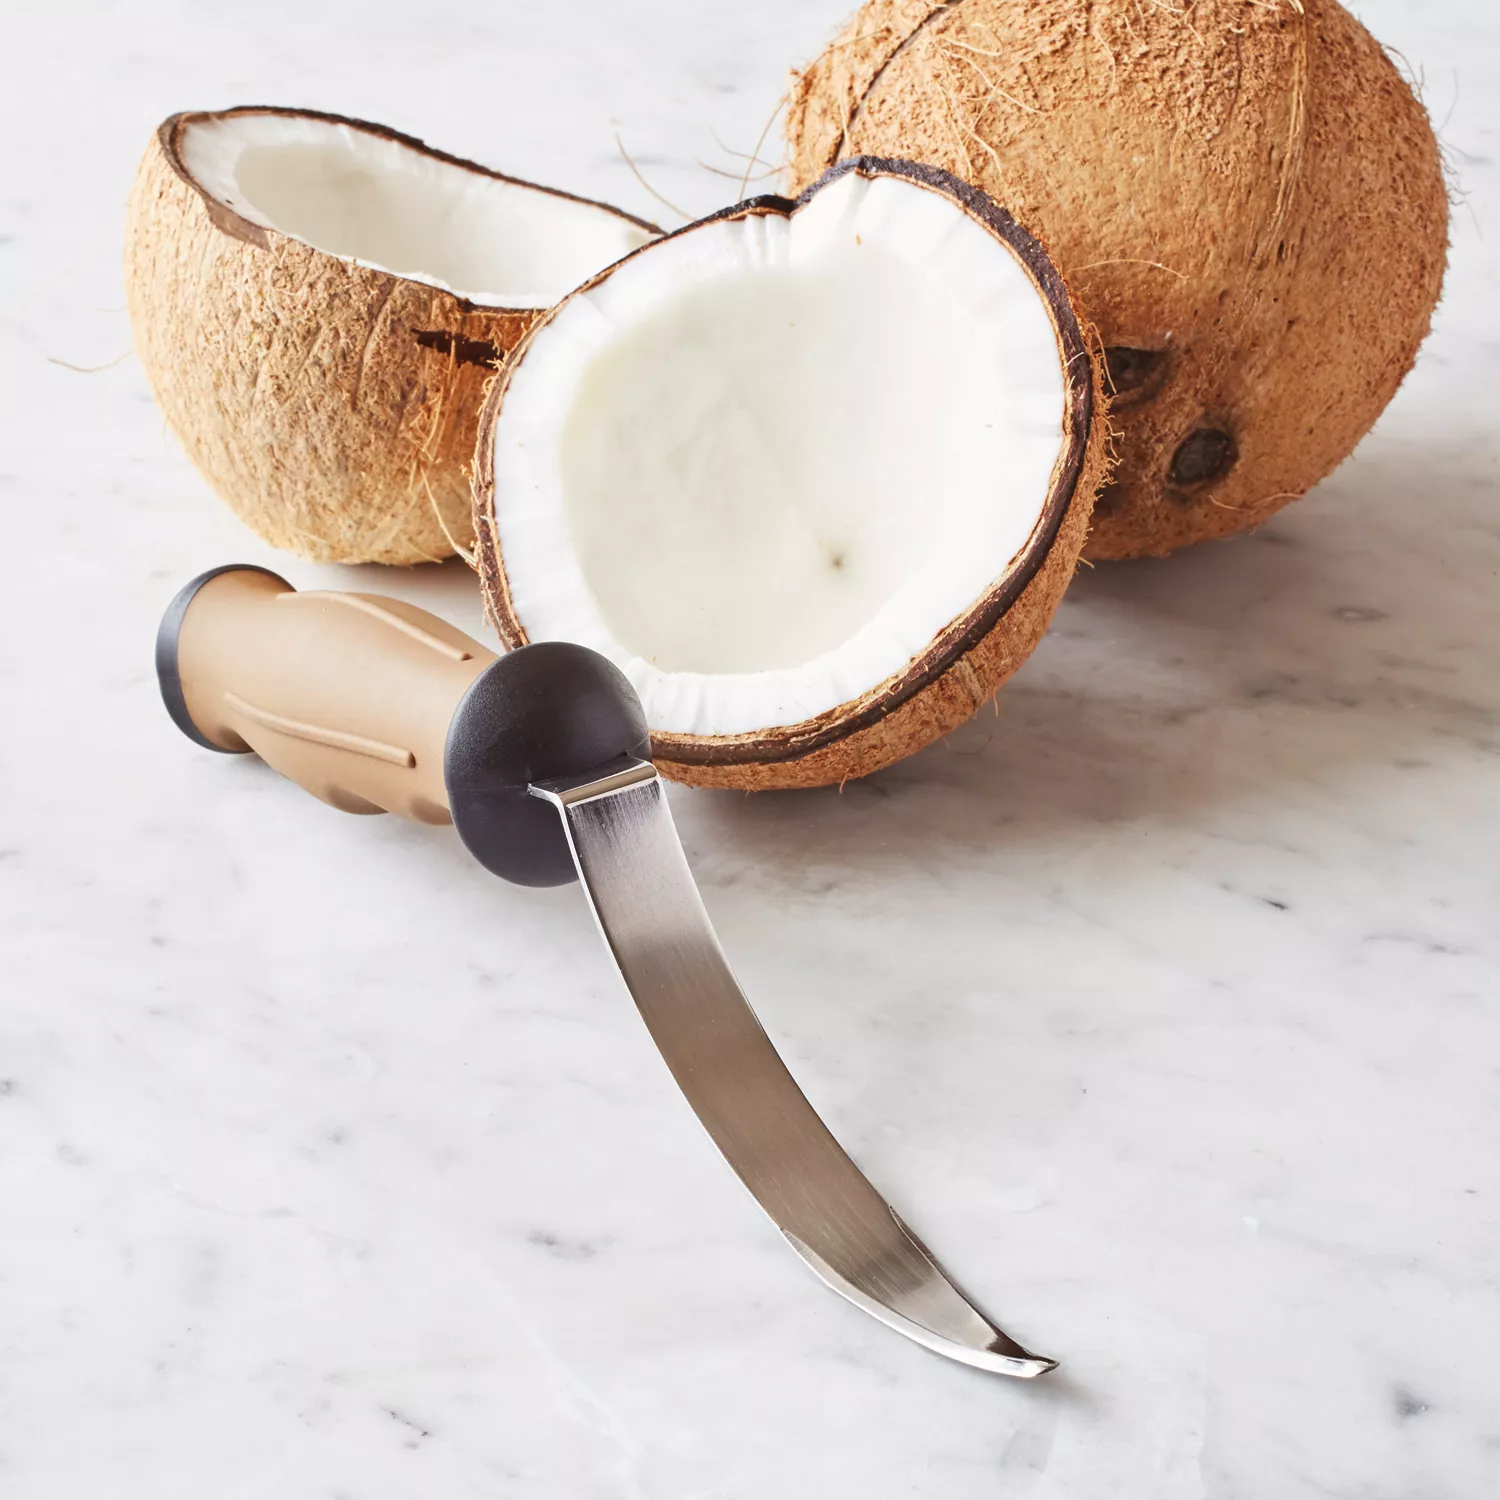 The Coconut Tool